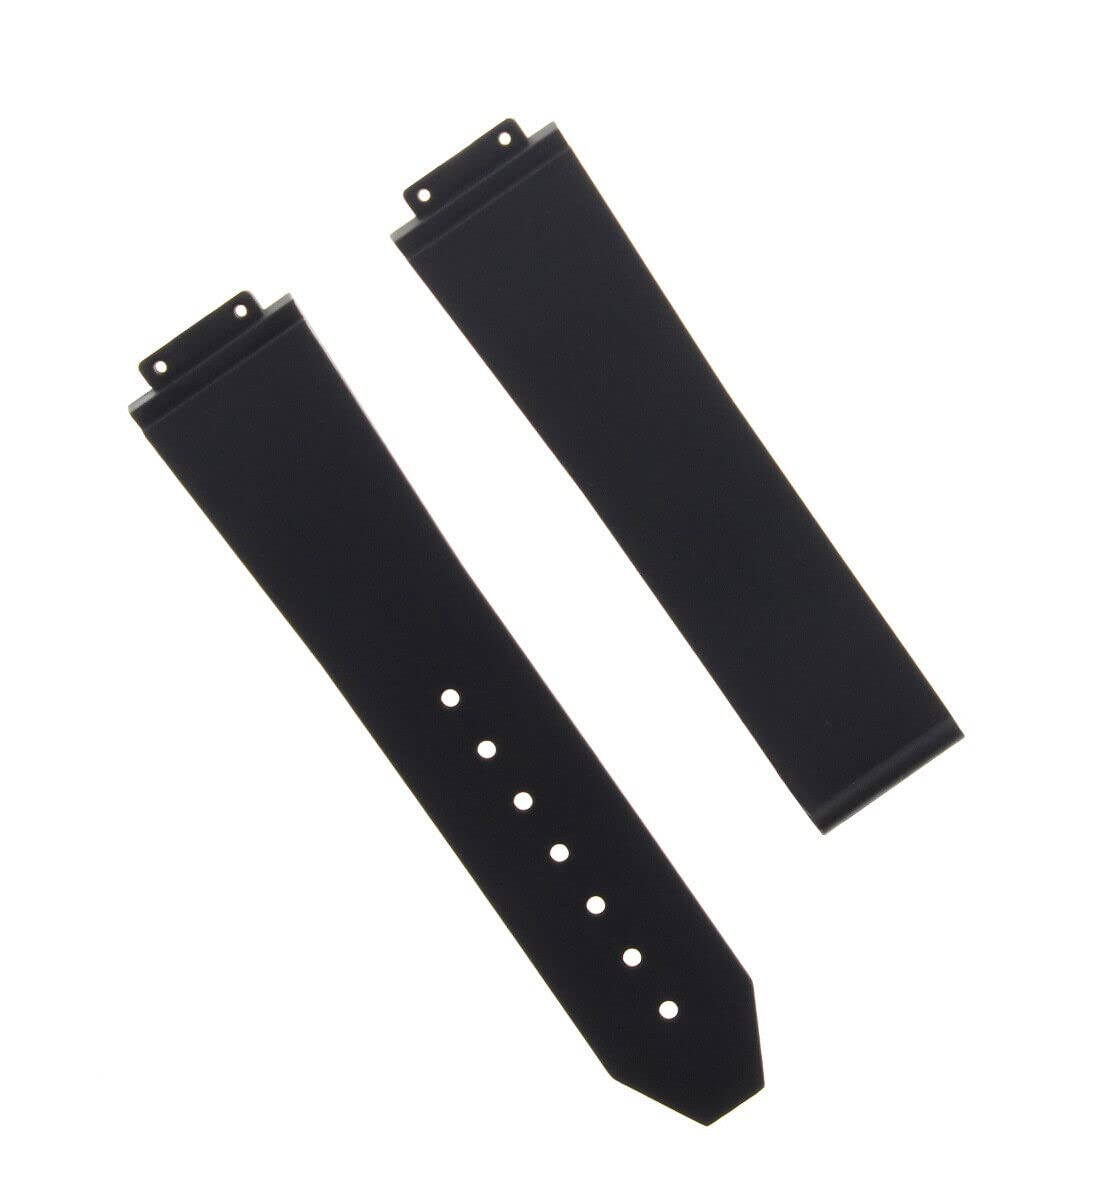 Ewatchparts 25MM RUBBER WATCH STRAP BAND COMPATIBLE WITH HUBLOT H BIG BANG DEPLOYMENT CLASP WATCH BLACK